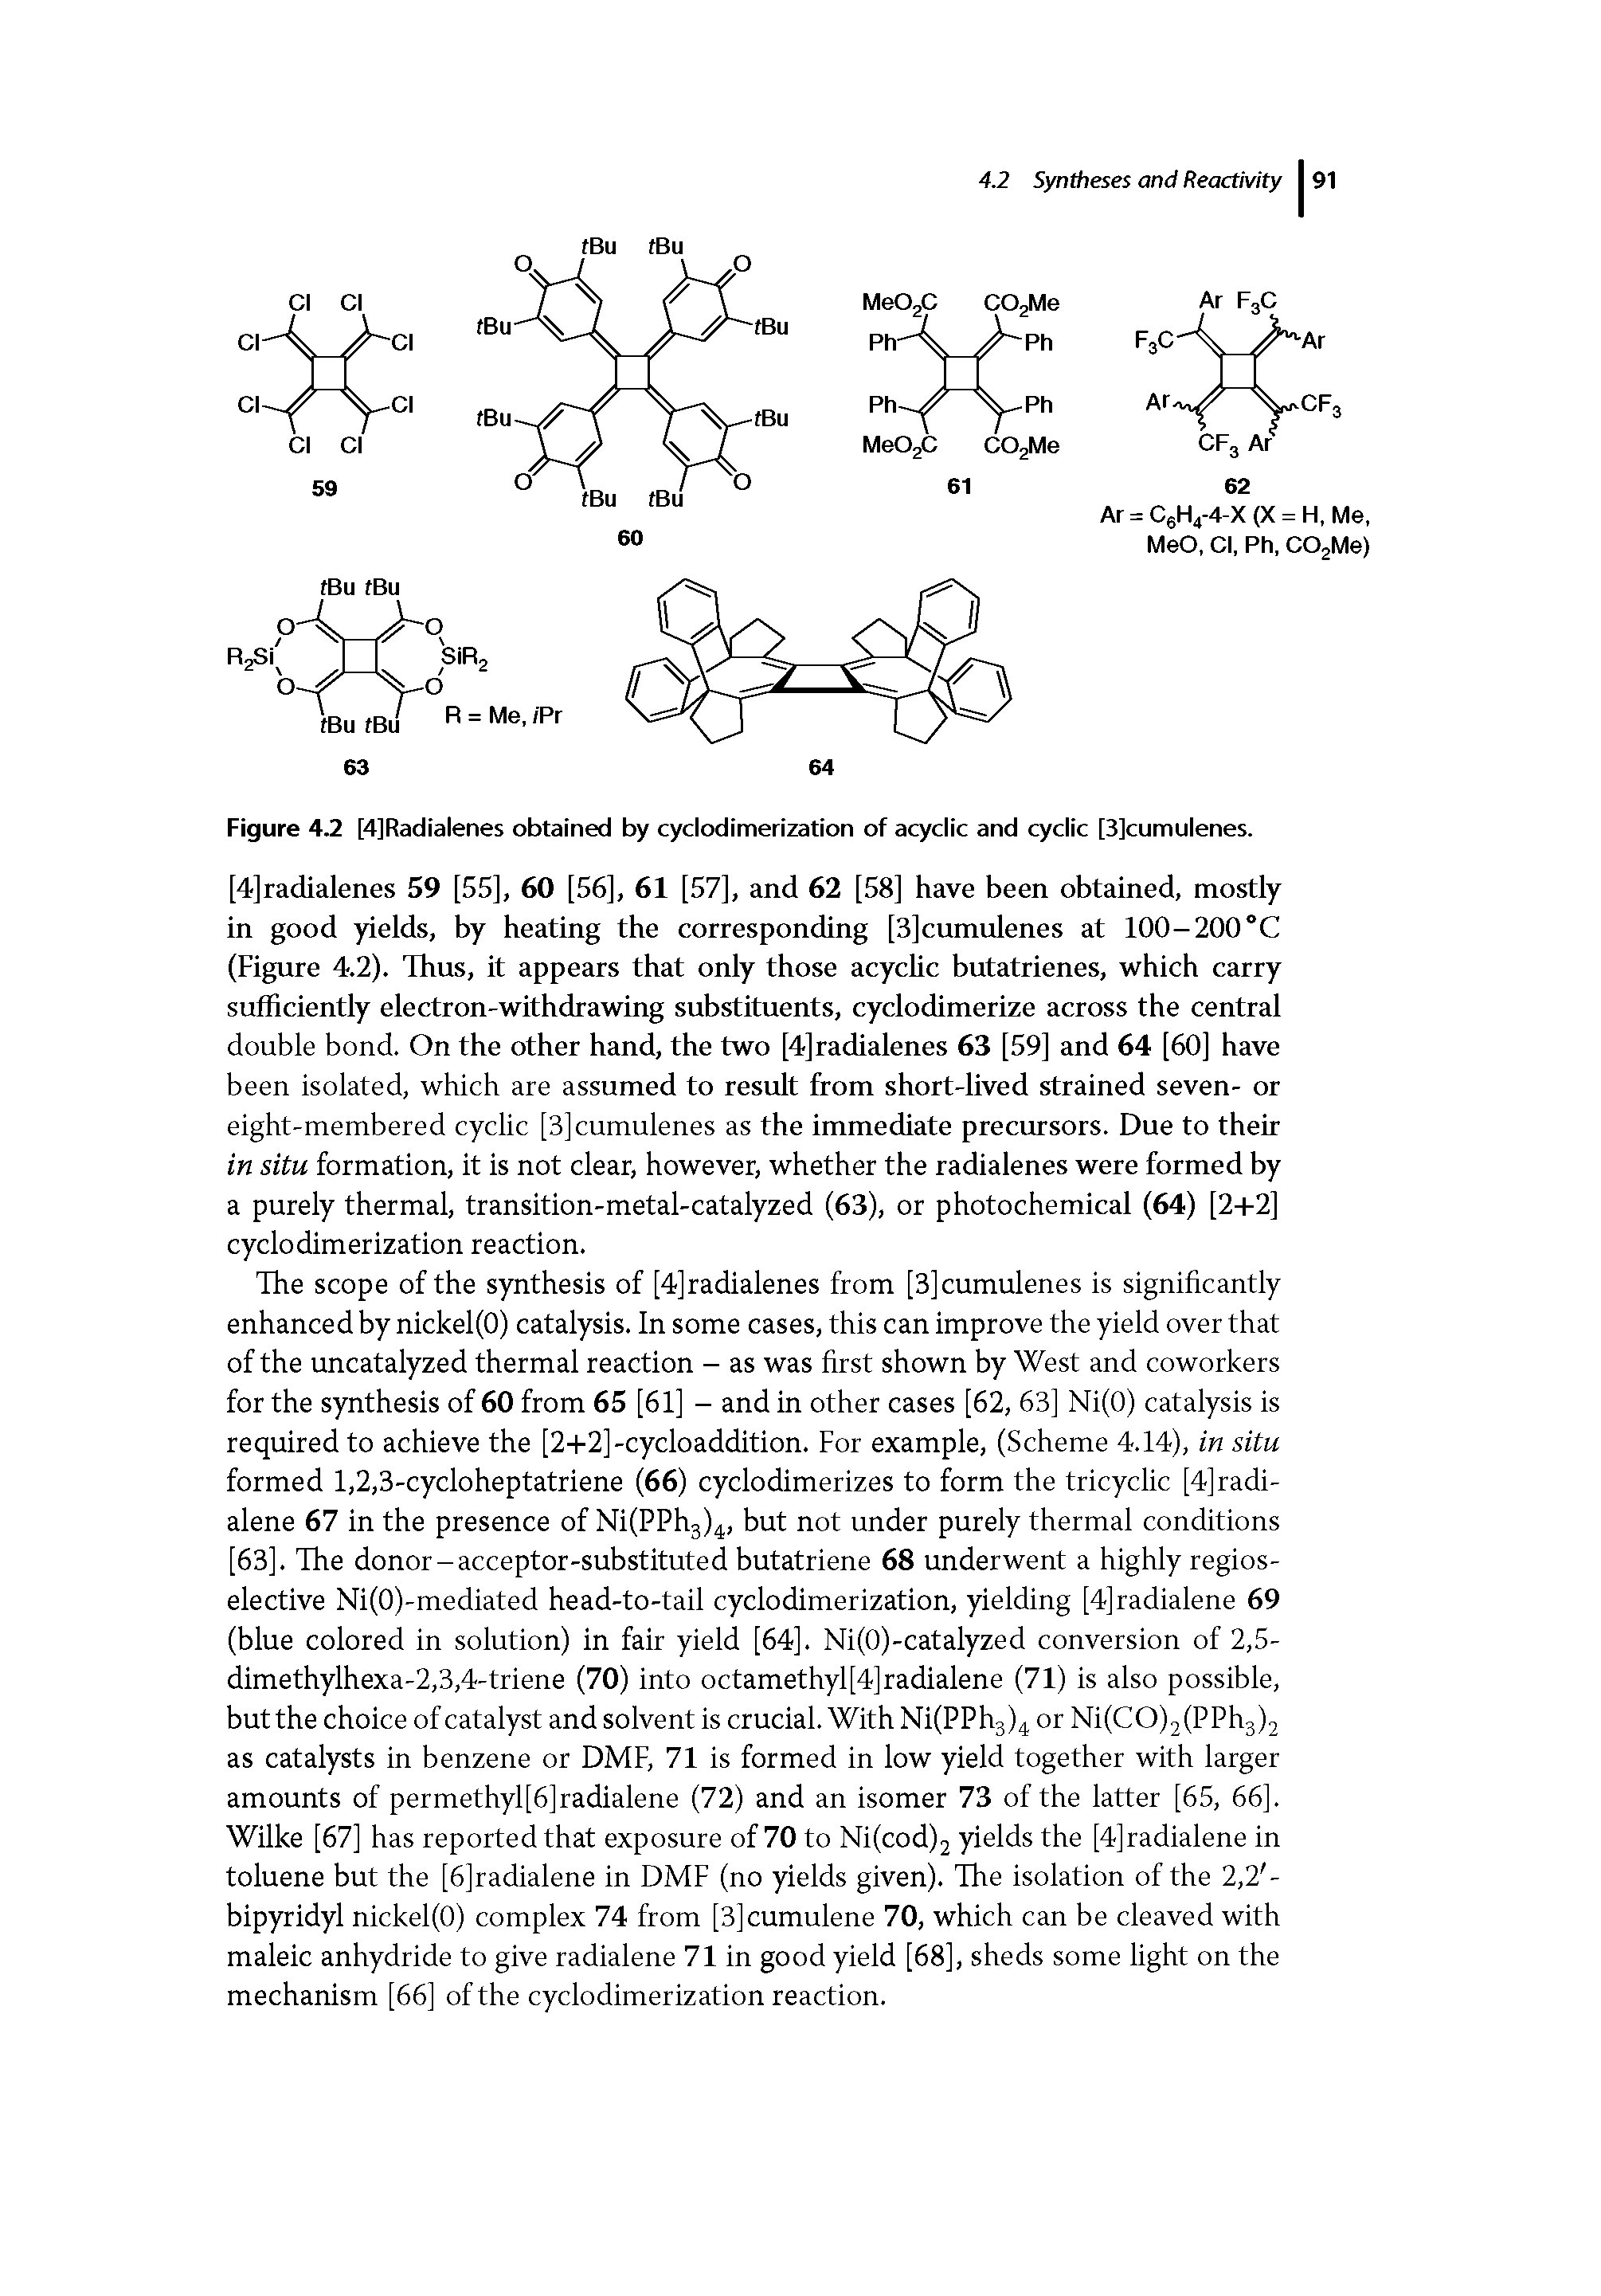 Figure 4.2 [4]Radialenes obtained by cyclodimerization of acyclic and cyclic [3]cumulenes.